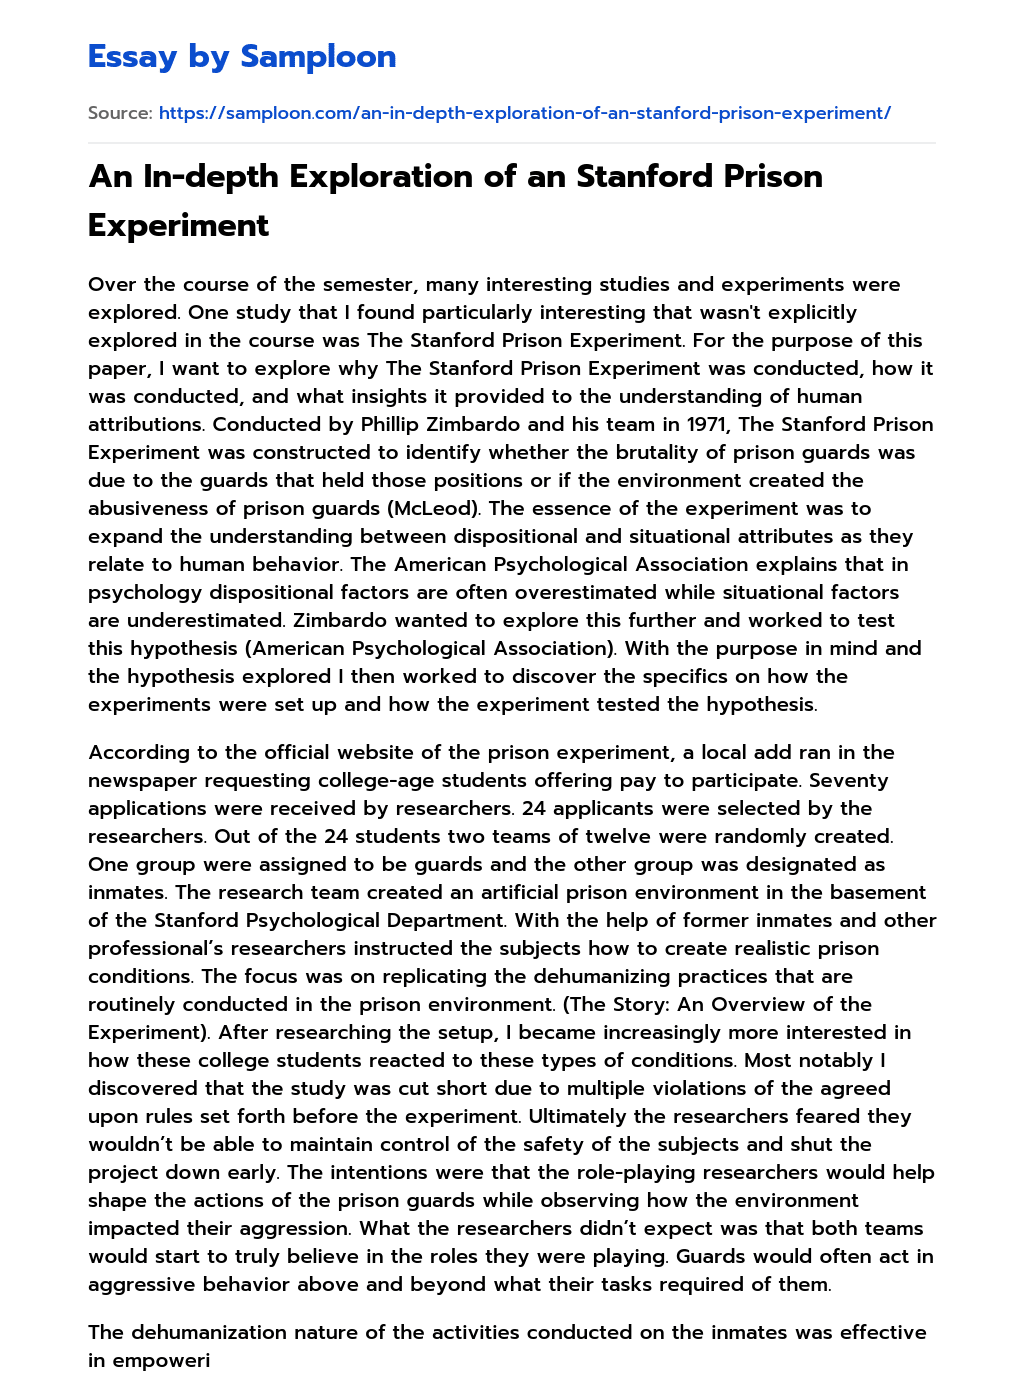 essay about stanford prison experiment